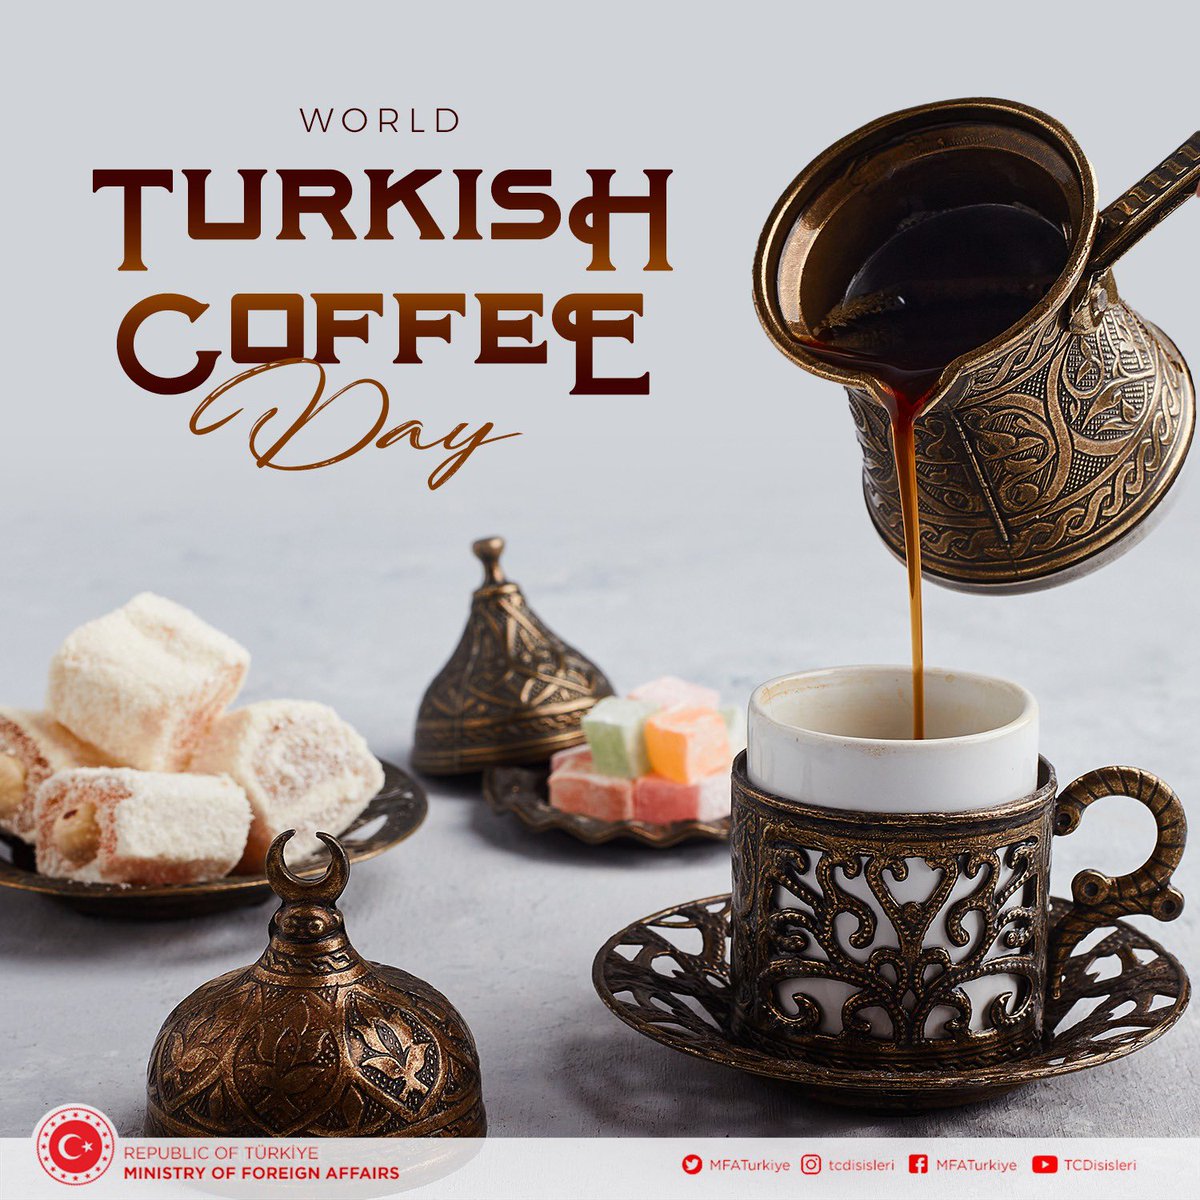 #TurkishCoffee originated from Istanbul and spread across the globe. It is also inducted into the UNESCO's Intangible Cultural Heritage of Humanity List. We proudly serve it to our guests in our missions all around the world.

Happy #WorldTurkishCoffeeDay ! ☕